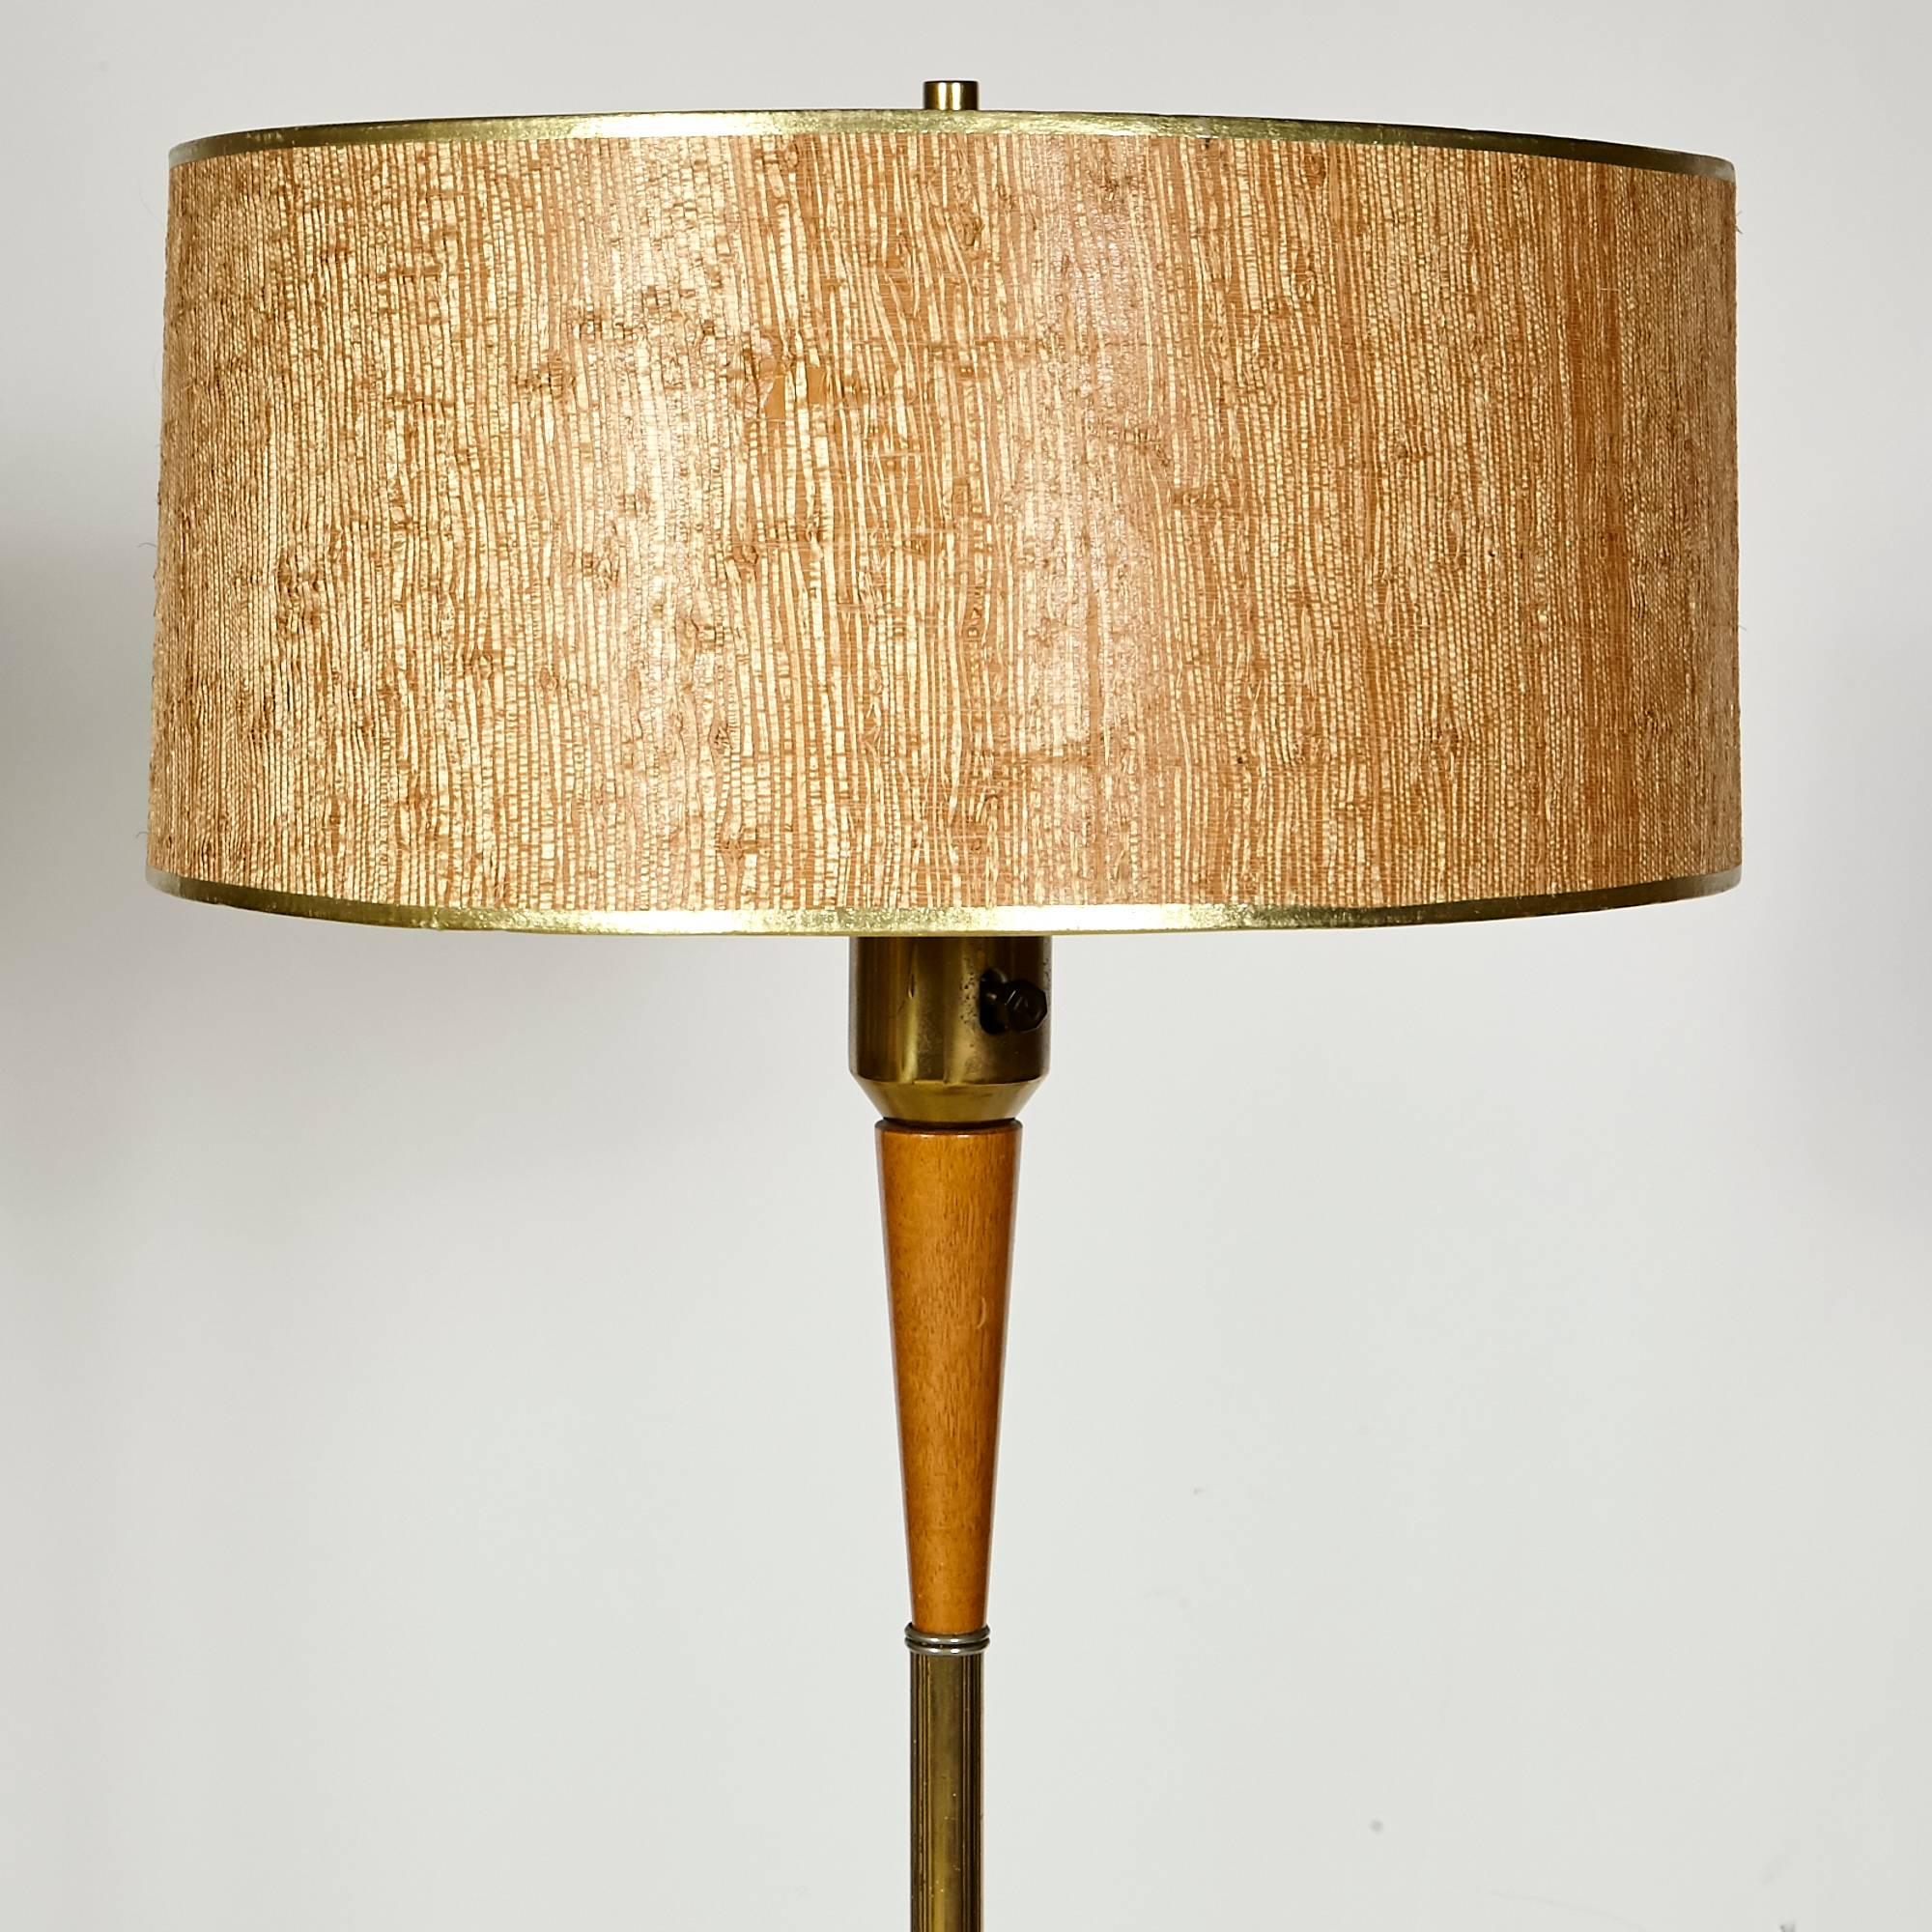 Mid-20th century Gerald Thurston for Lightolier brass and walnut wood floor lamp with the original grass shade. Wired for the US and in working condition. Uses standard size bulbs.
 